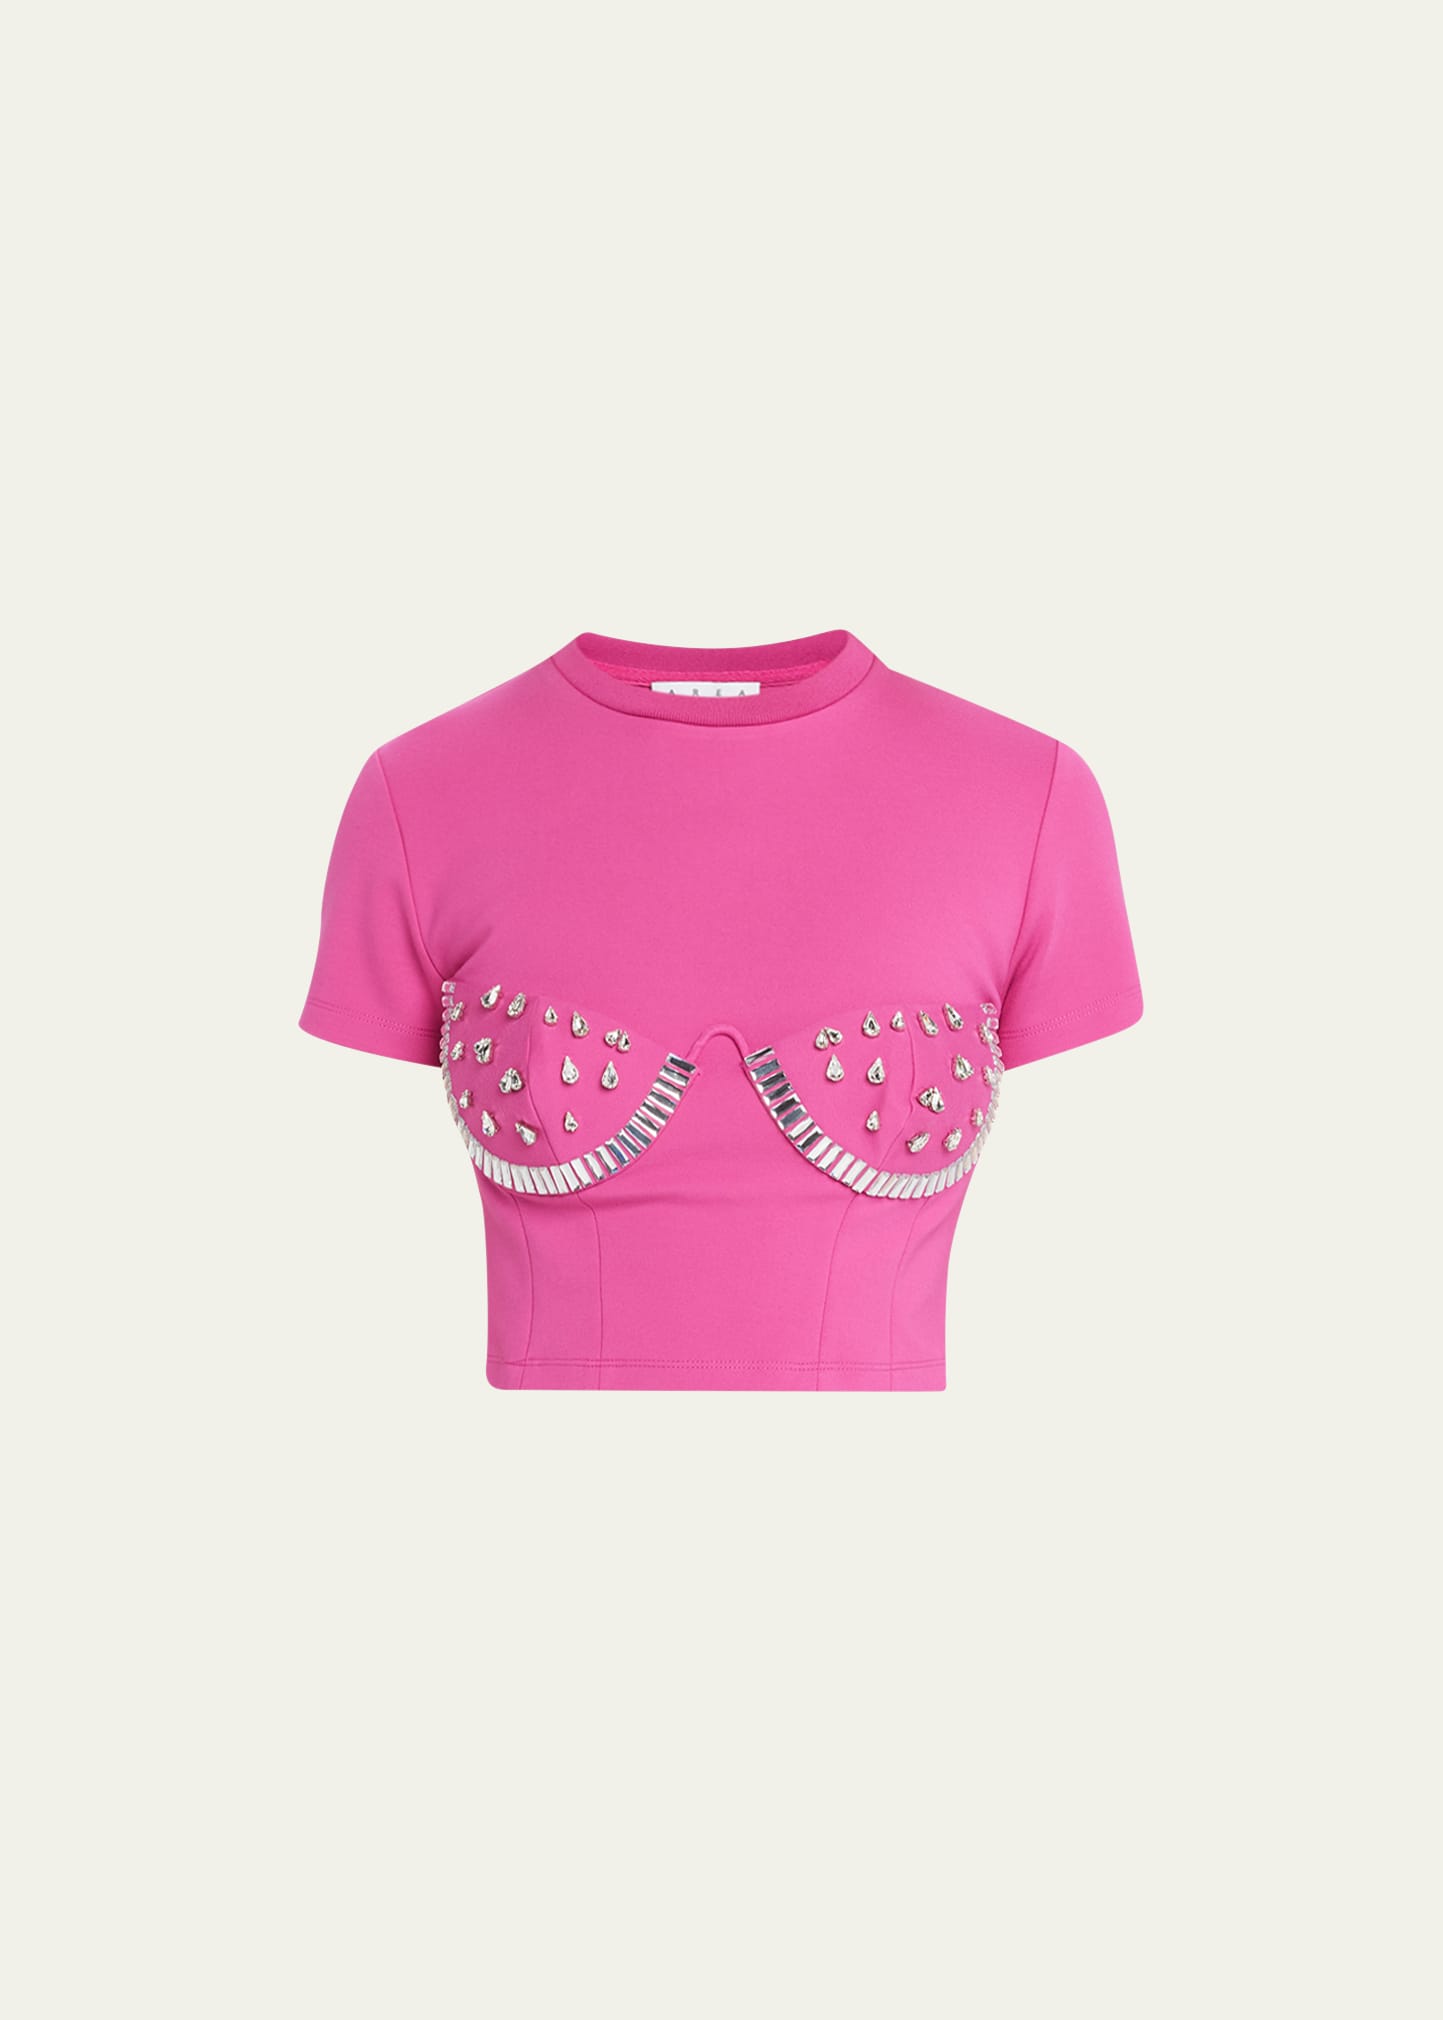 AREA CRYSTAL WATERMELON CUP CROPPED TEE